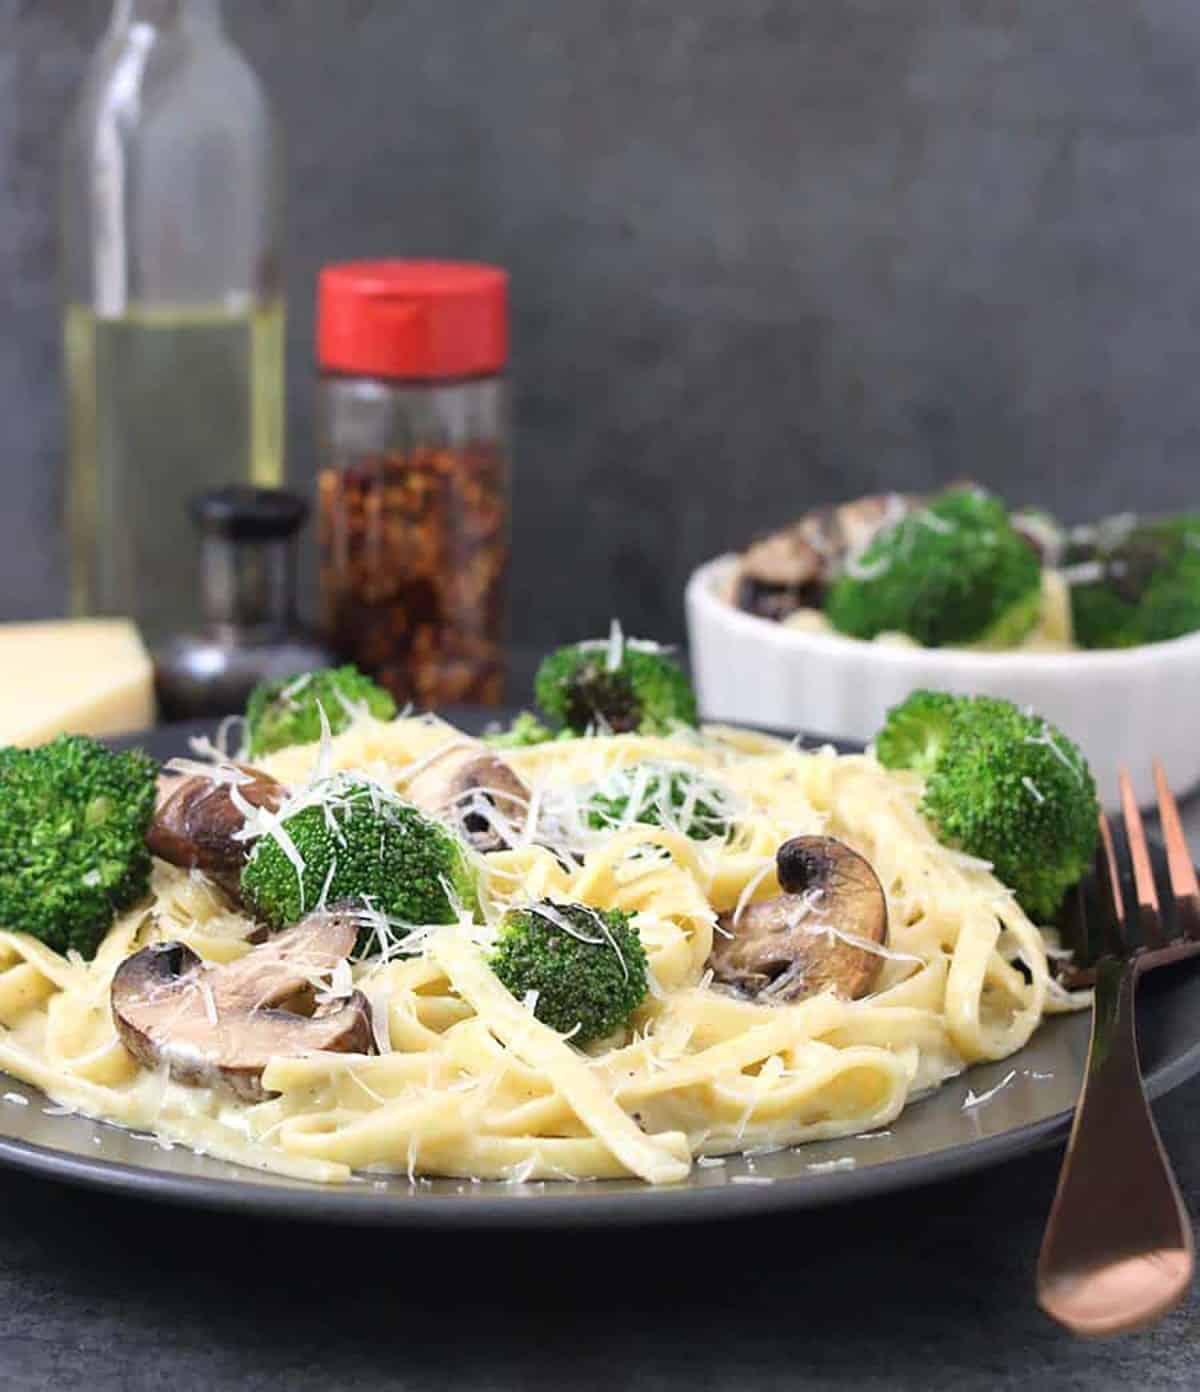 fettuccine alfredo pasta made with heavy cream, butter, parmesan cheese, mushroom and broccoli. 